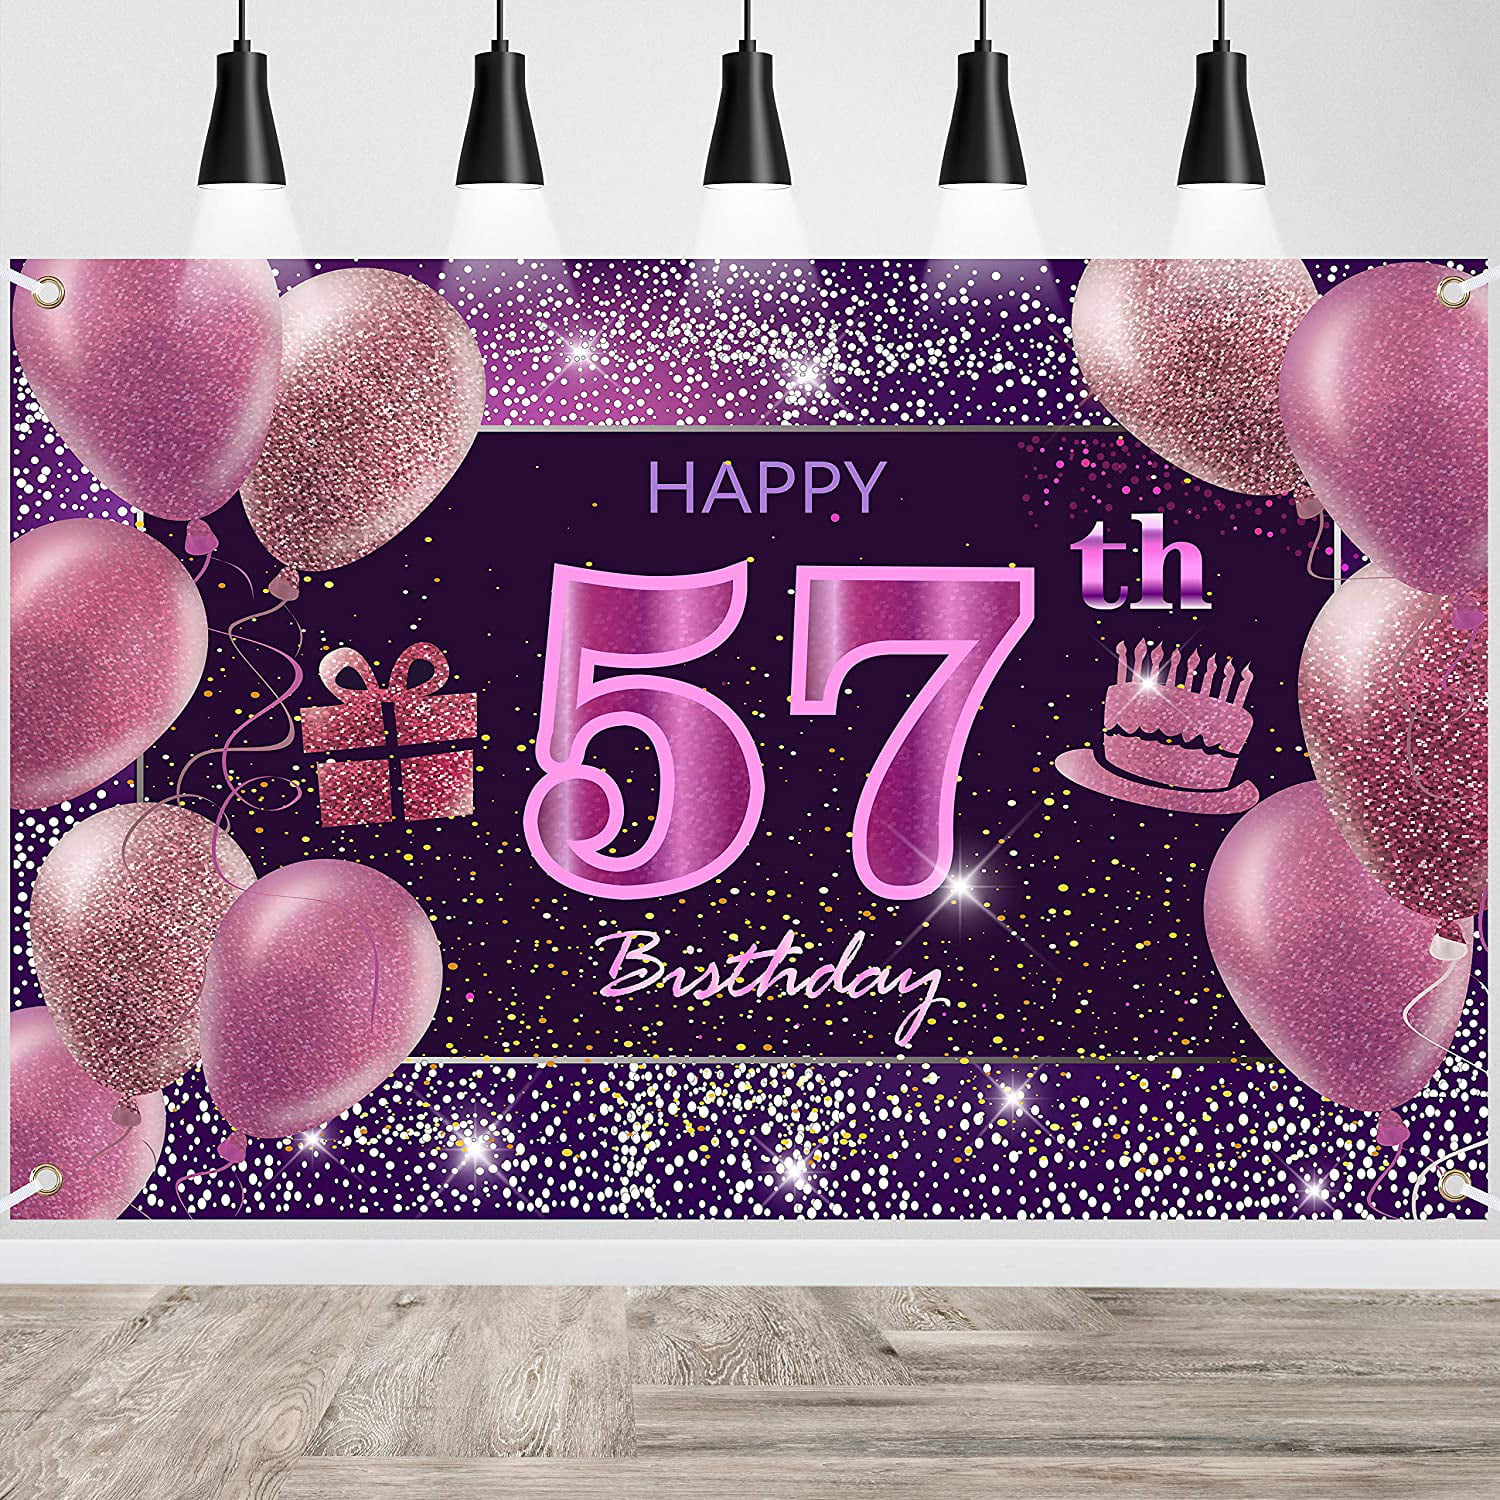 x2 Personalised Birthday Banner Floral Children Kids Party Decoration Poster 57 